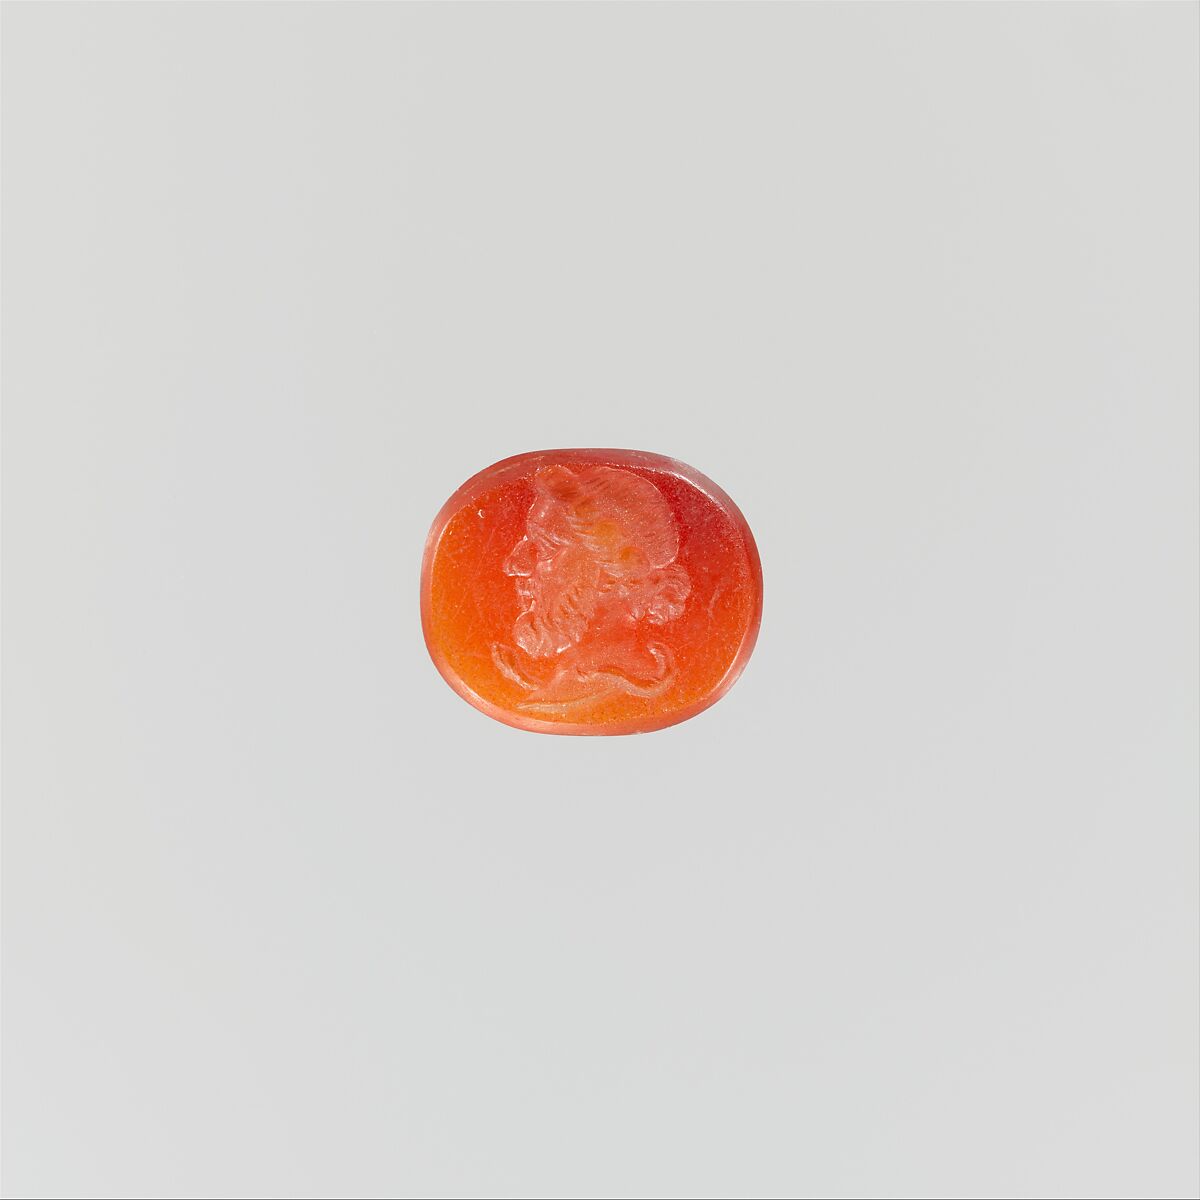 Carnelian ring stone with Asclepius, the god of medicine